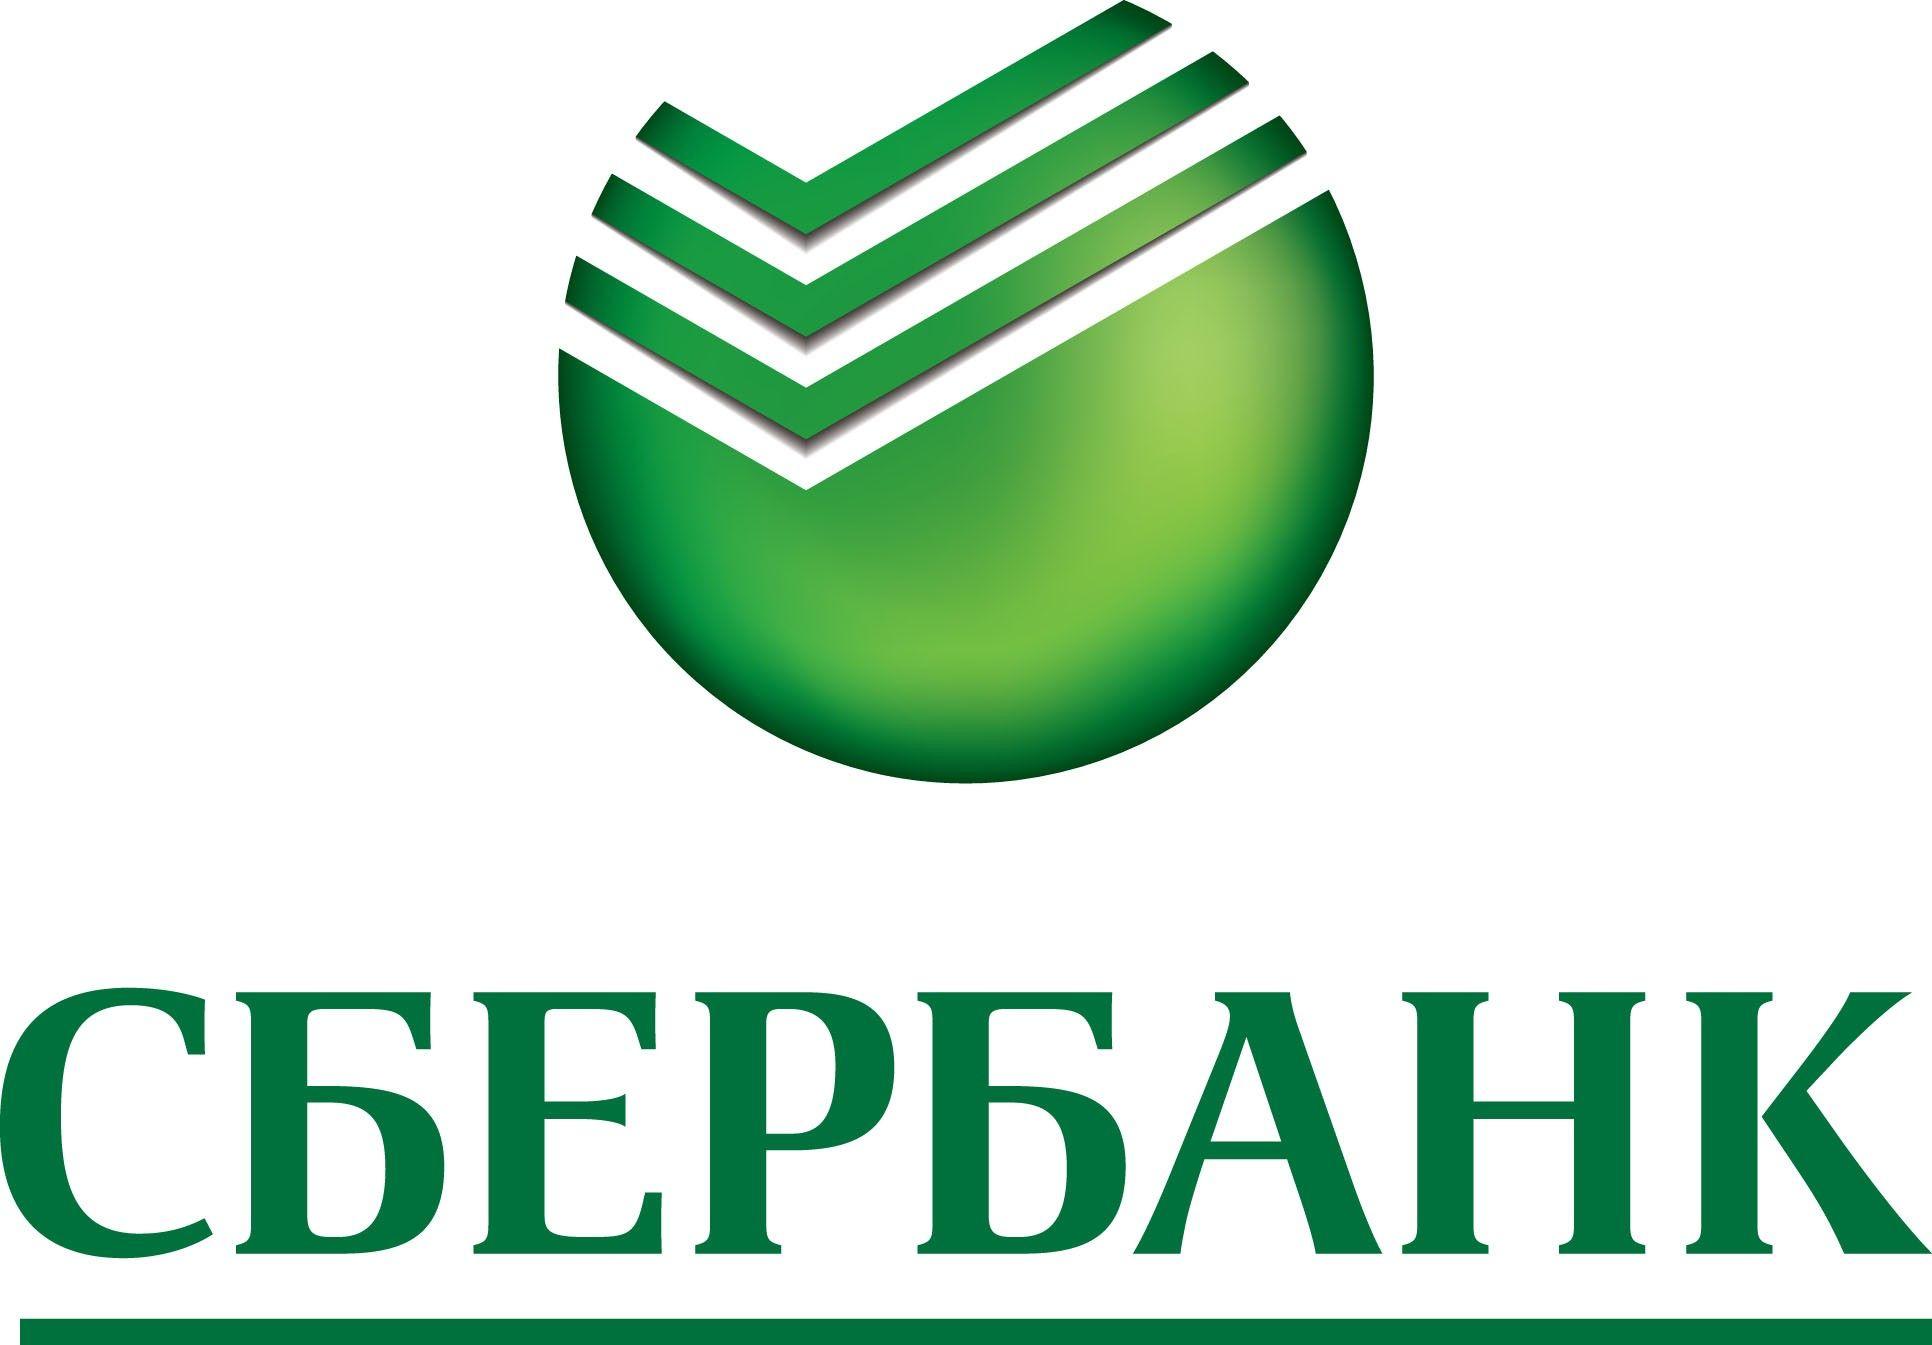 Sberbank Logo - Sberbank logo 2010-2011 in the formats eps and ai | Photo and ...